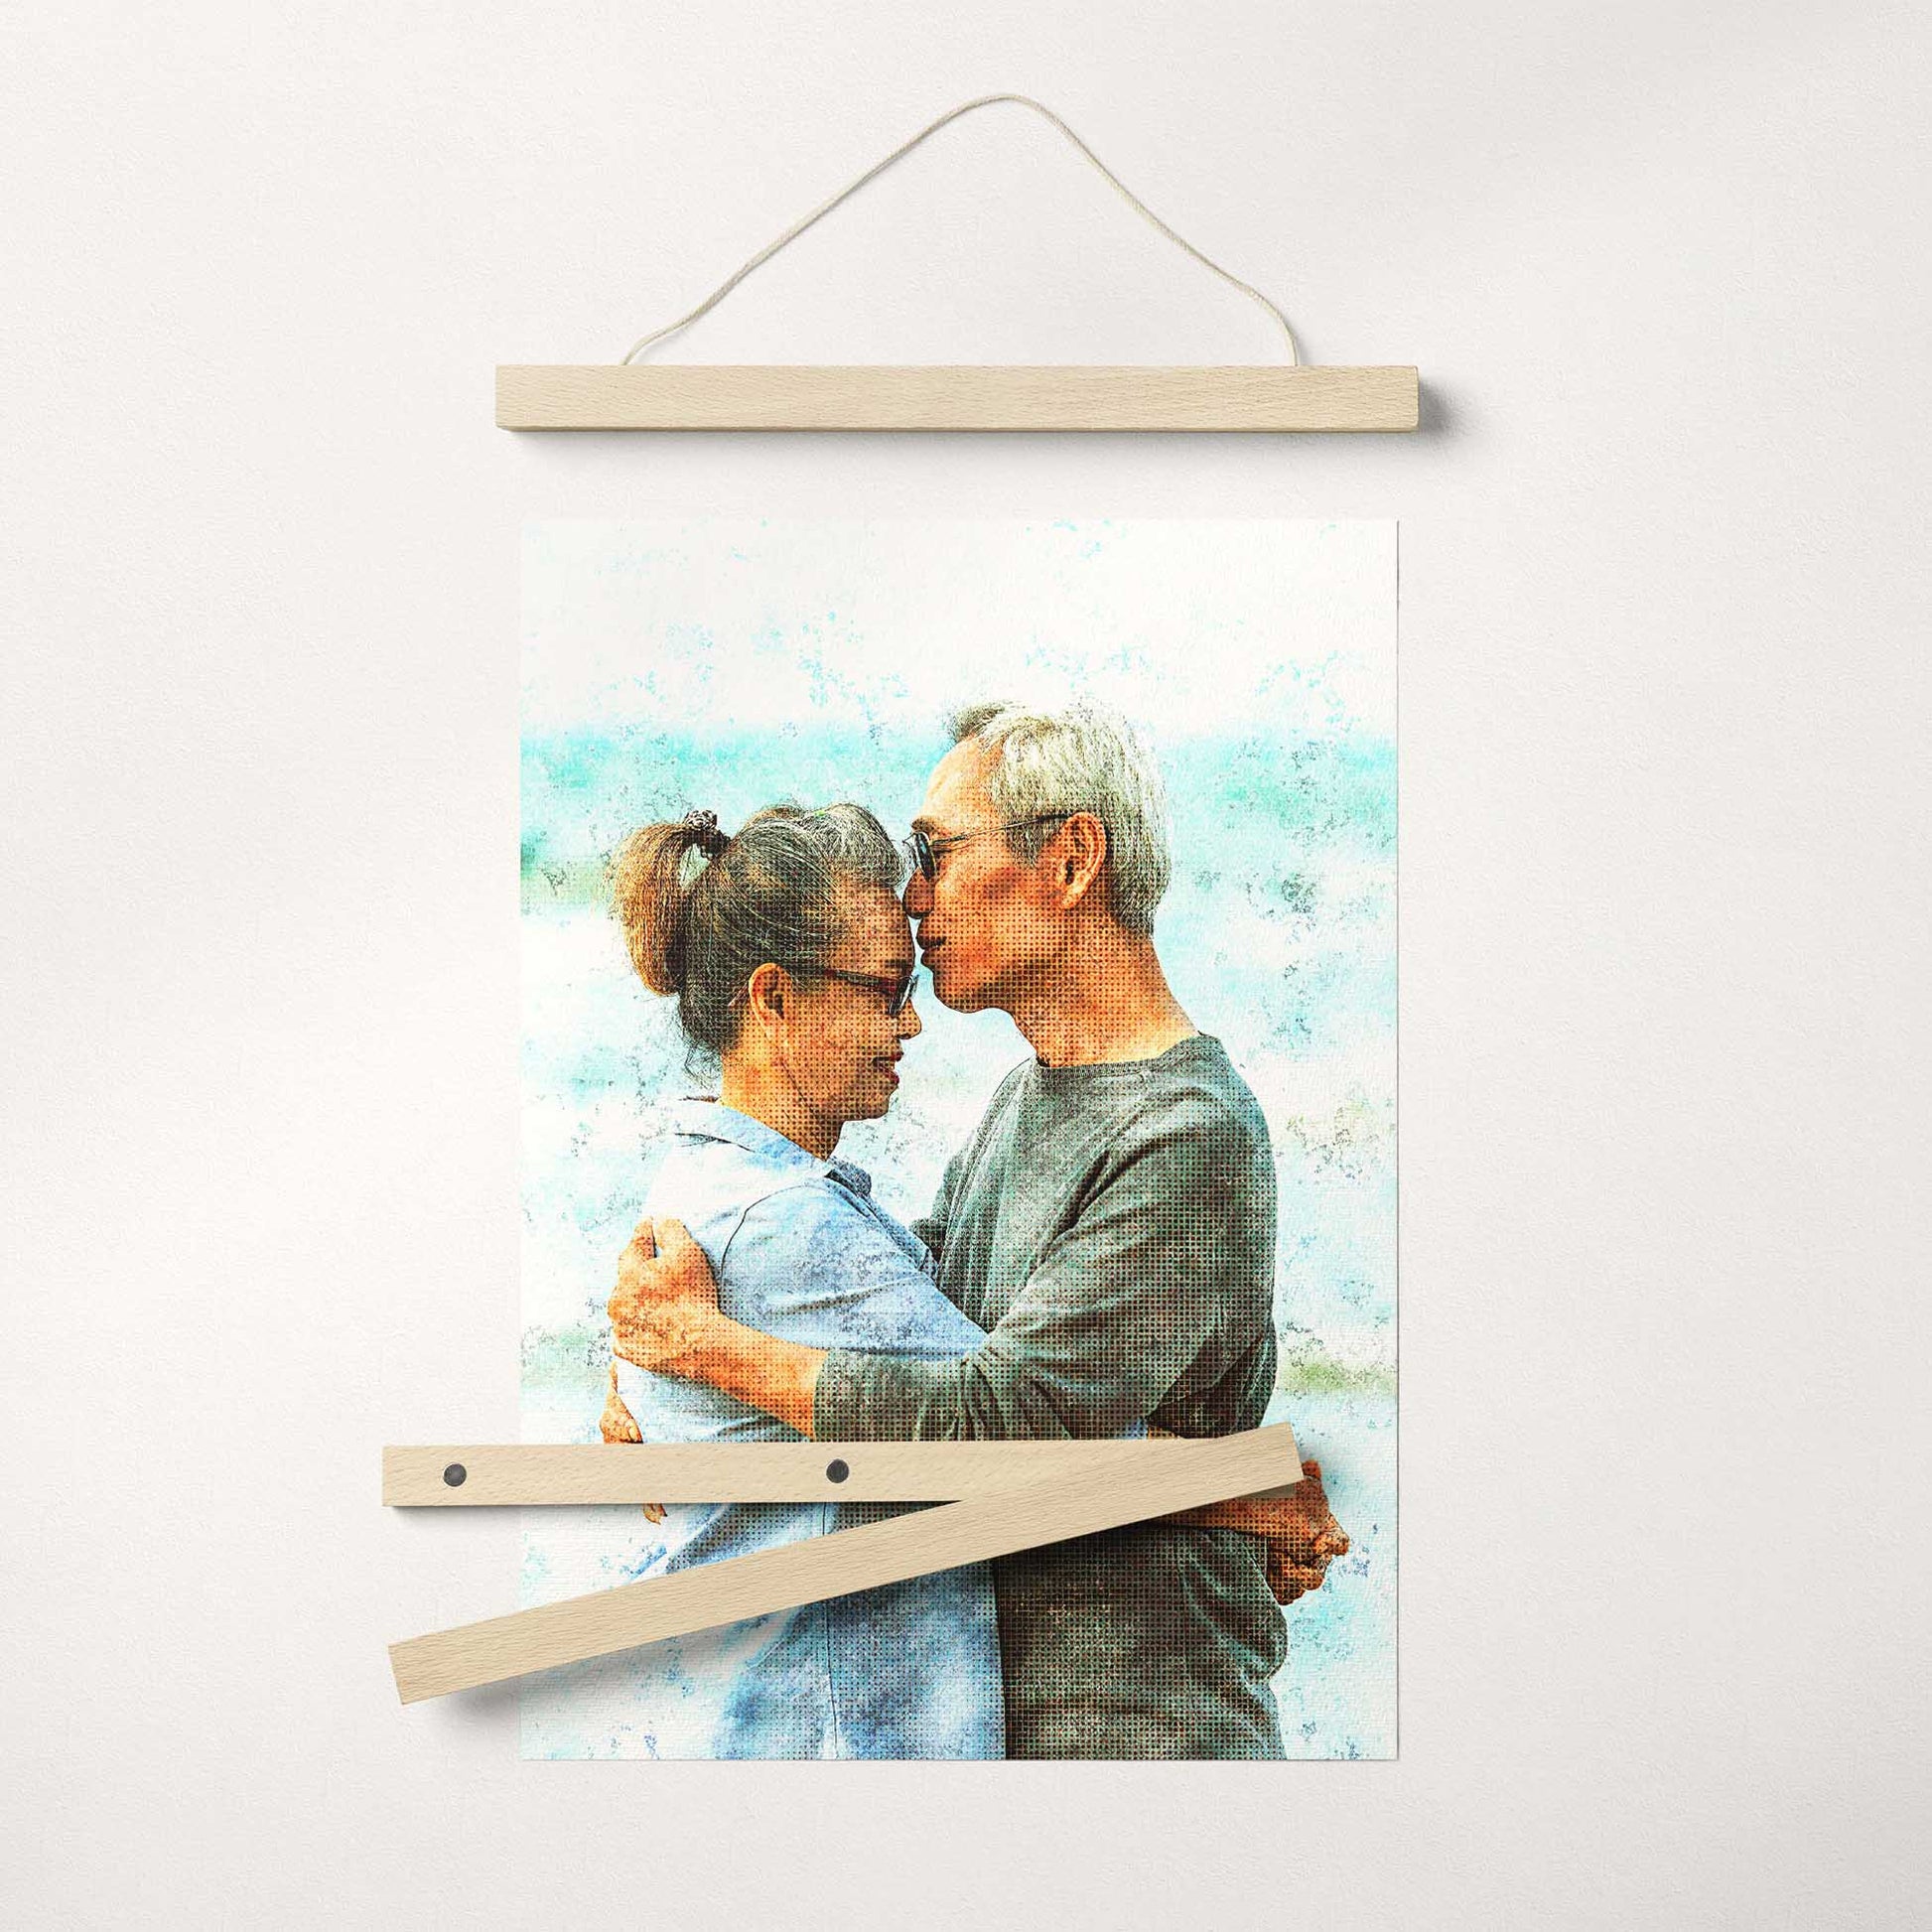 Transform your walls into a gallery of memories with the Personalised Grunge FX Poster Hanger. Its retro grunge effect and halftone filter create a visually stunning piece of wall art that captures the essence of the past